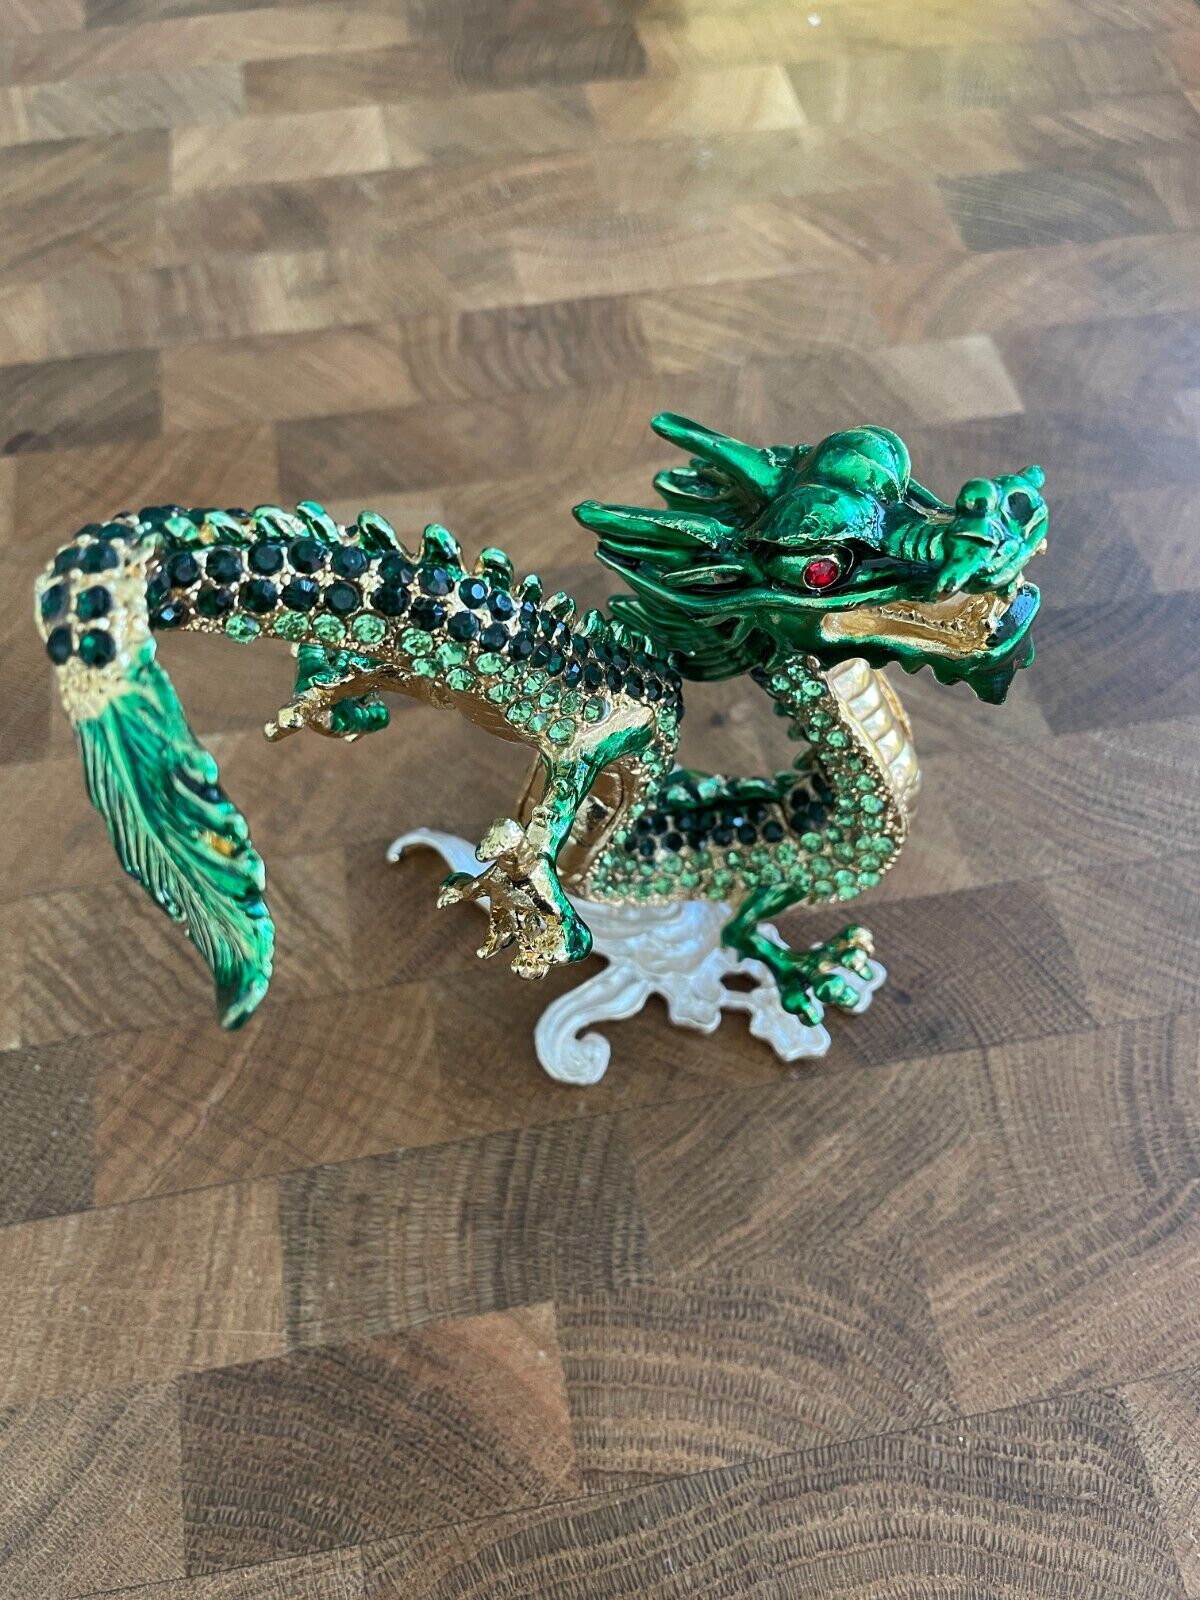 Green Dragon Hand Painted Bejeweled Hinged Figurines